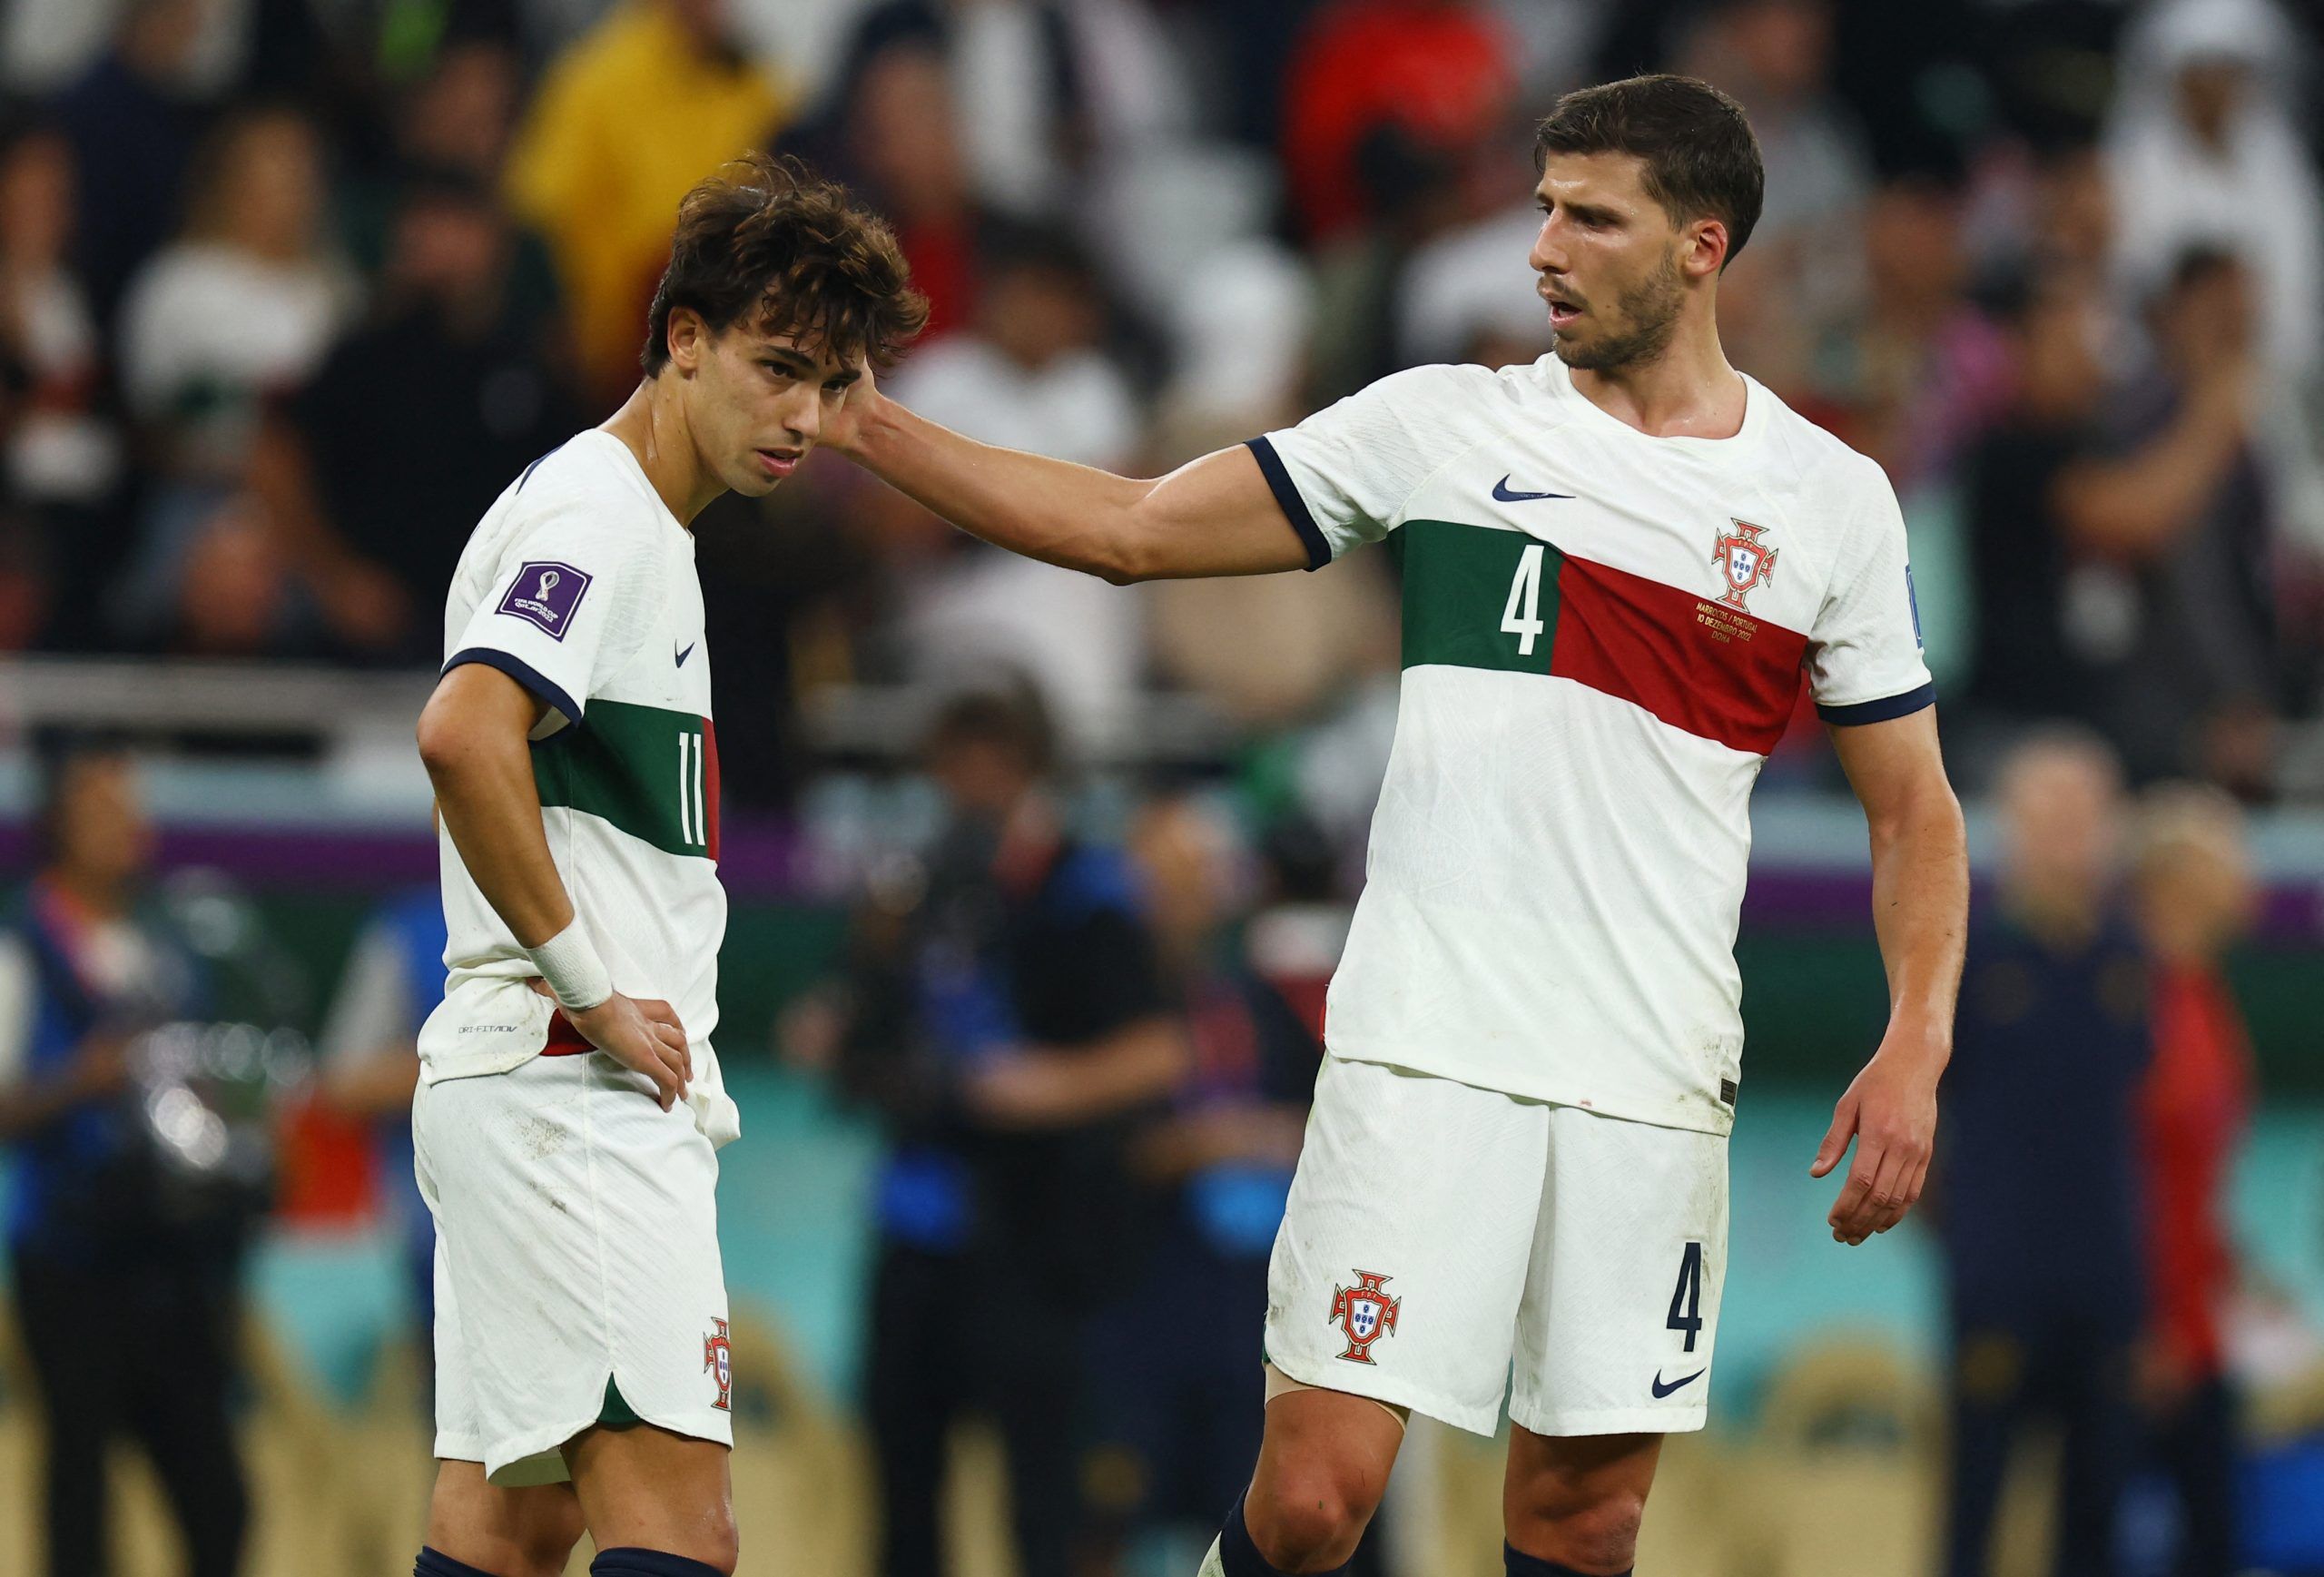 Soccer Football - FIFA World Cup Qatar 2022 - Quarter Final - Morocco v Portugal - Al Thumama Stadium, Doha, Qatar - December 10, 2022 Portugal's Joao Felix looks dejected alongside Ruben Dias after the match as Portugal are eliminated from the World Cup REUTERS/Molly Darlington